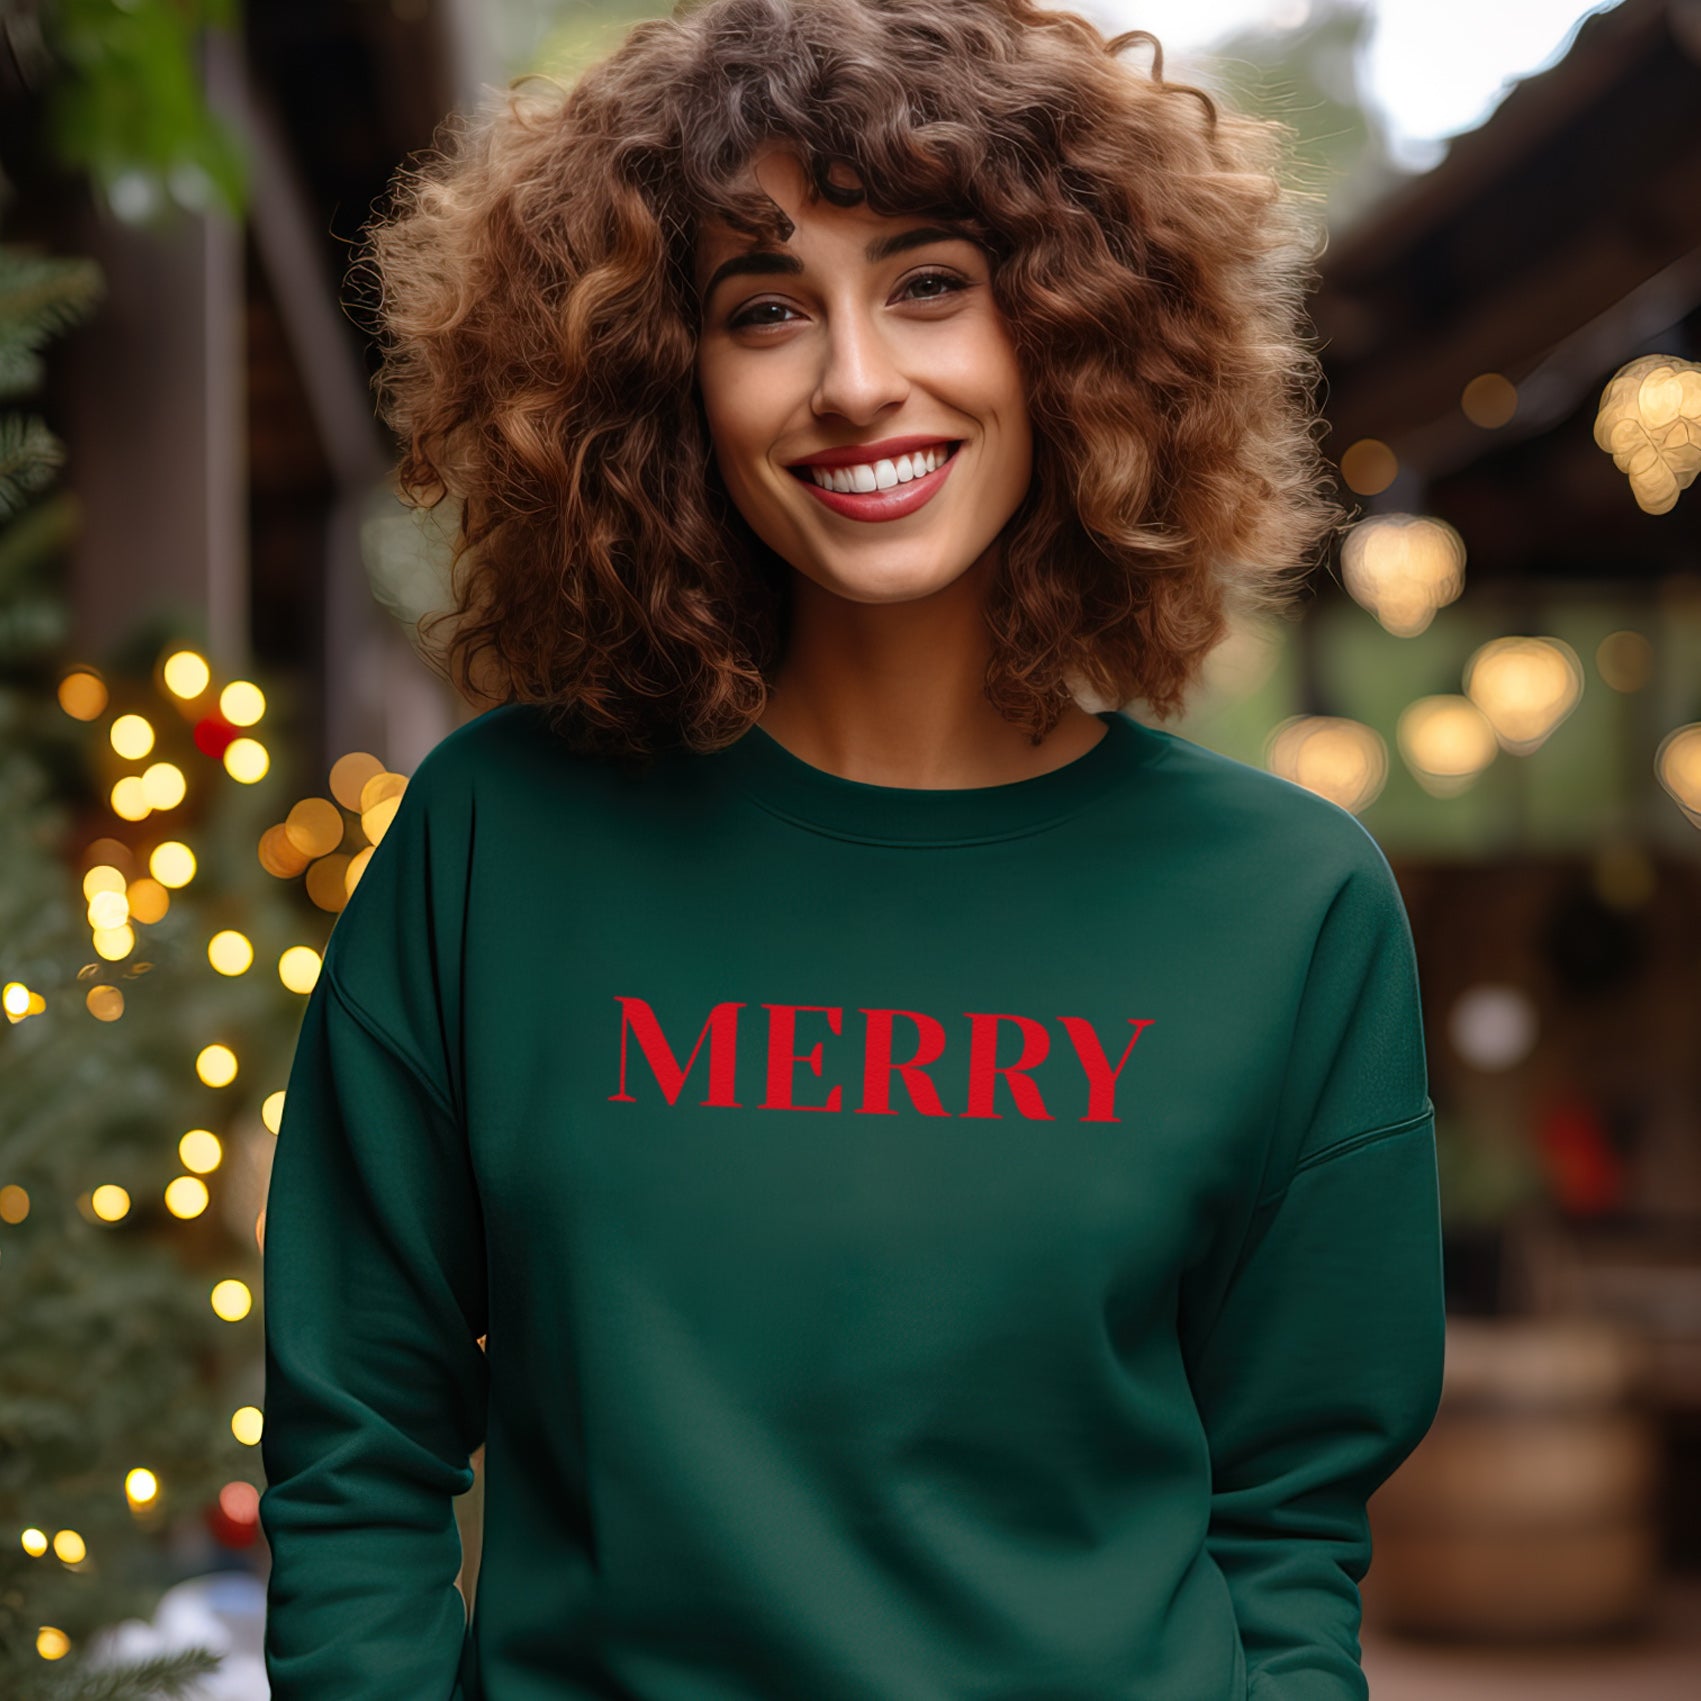 MERRY Text Christmas Sweater - Christmas Jumper Sweatshirt - All Sizes